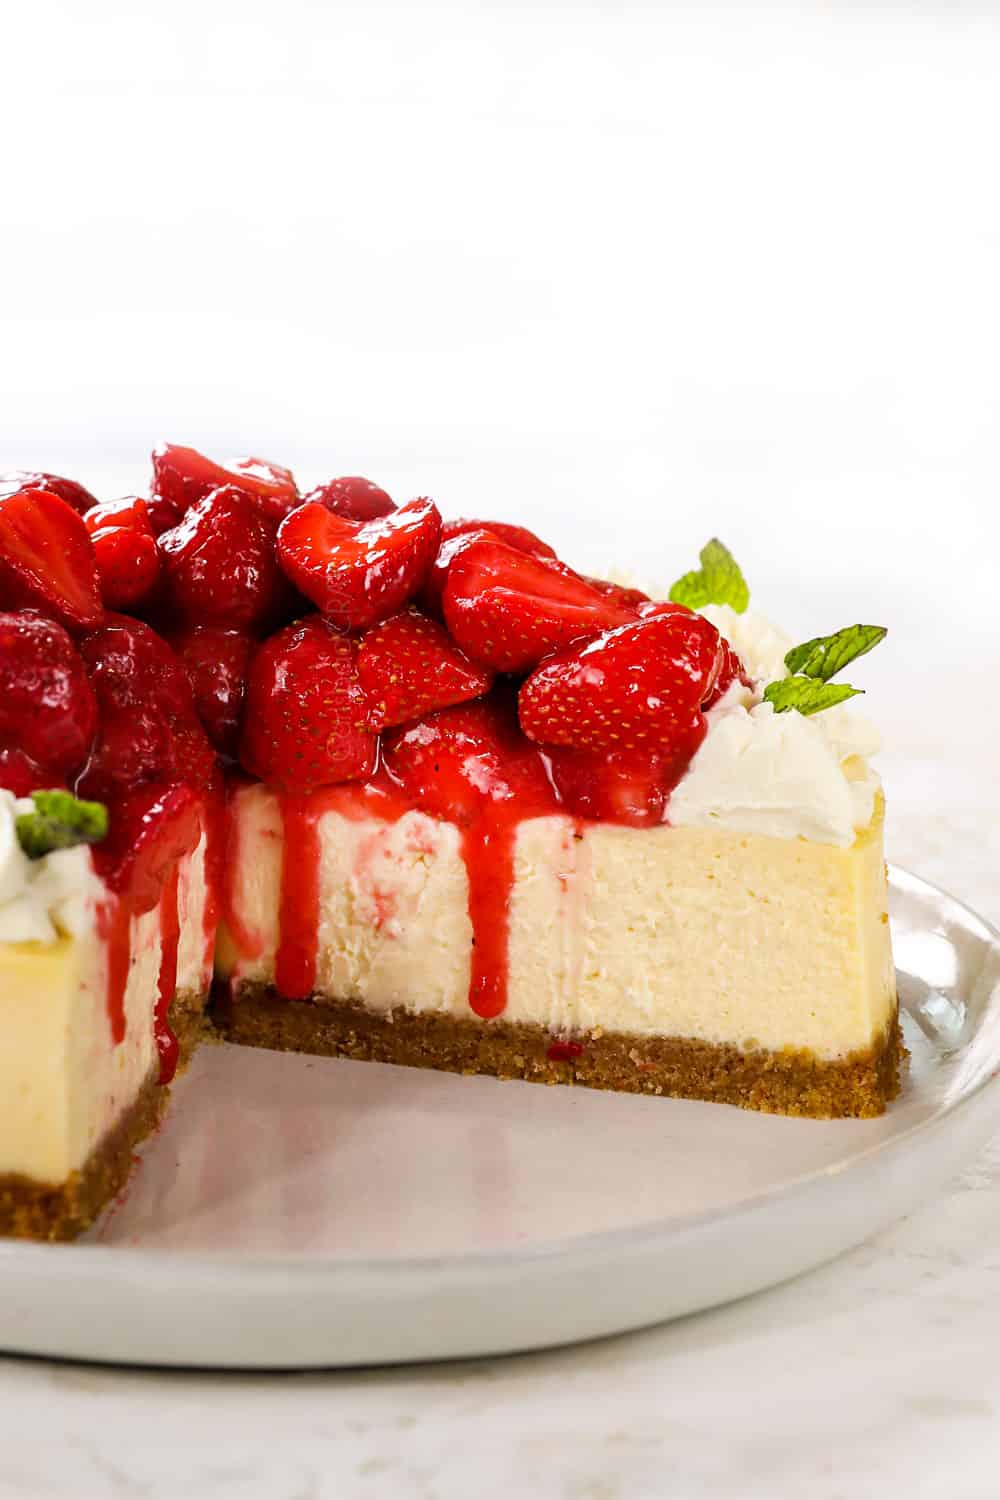 up close of strawberry cheesecake with a piece missing showing how creamy it is